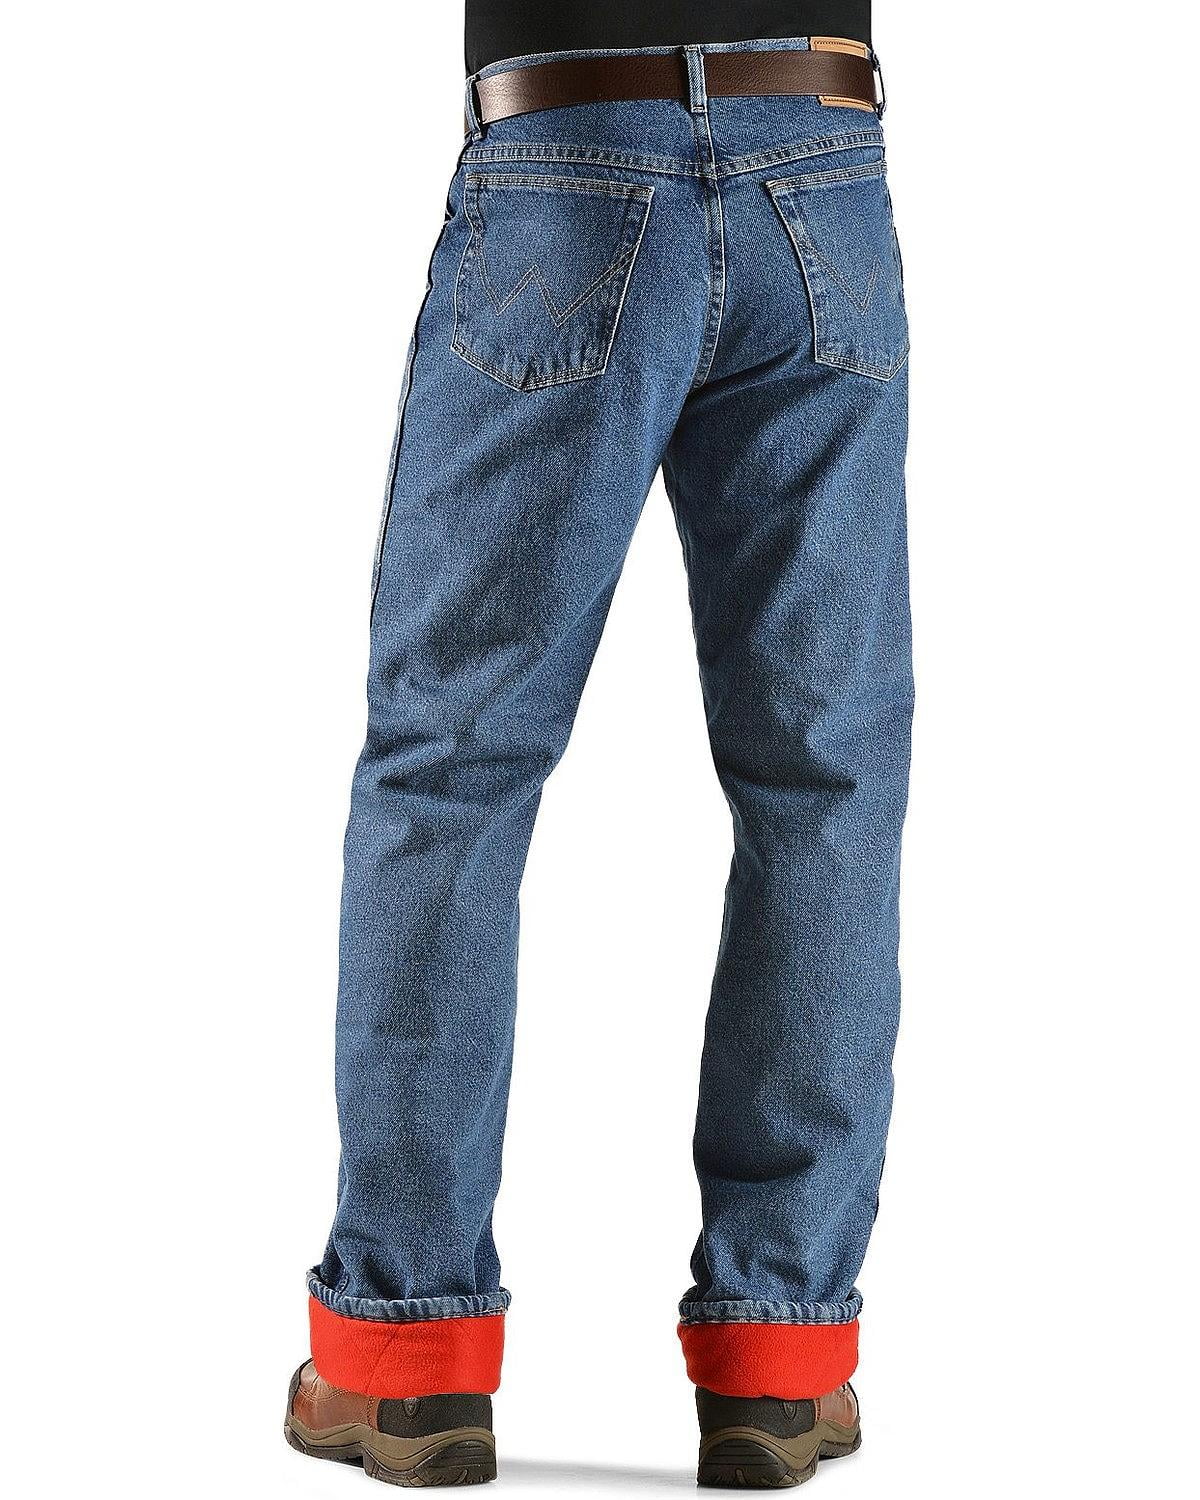 Wrangler Men's Jeans Rugged Wear Relaxed Fit Flannel Lined - 33213Sw -  